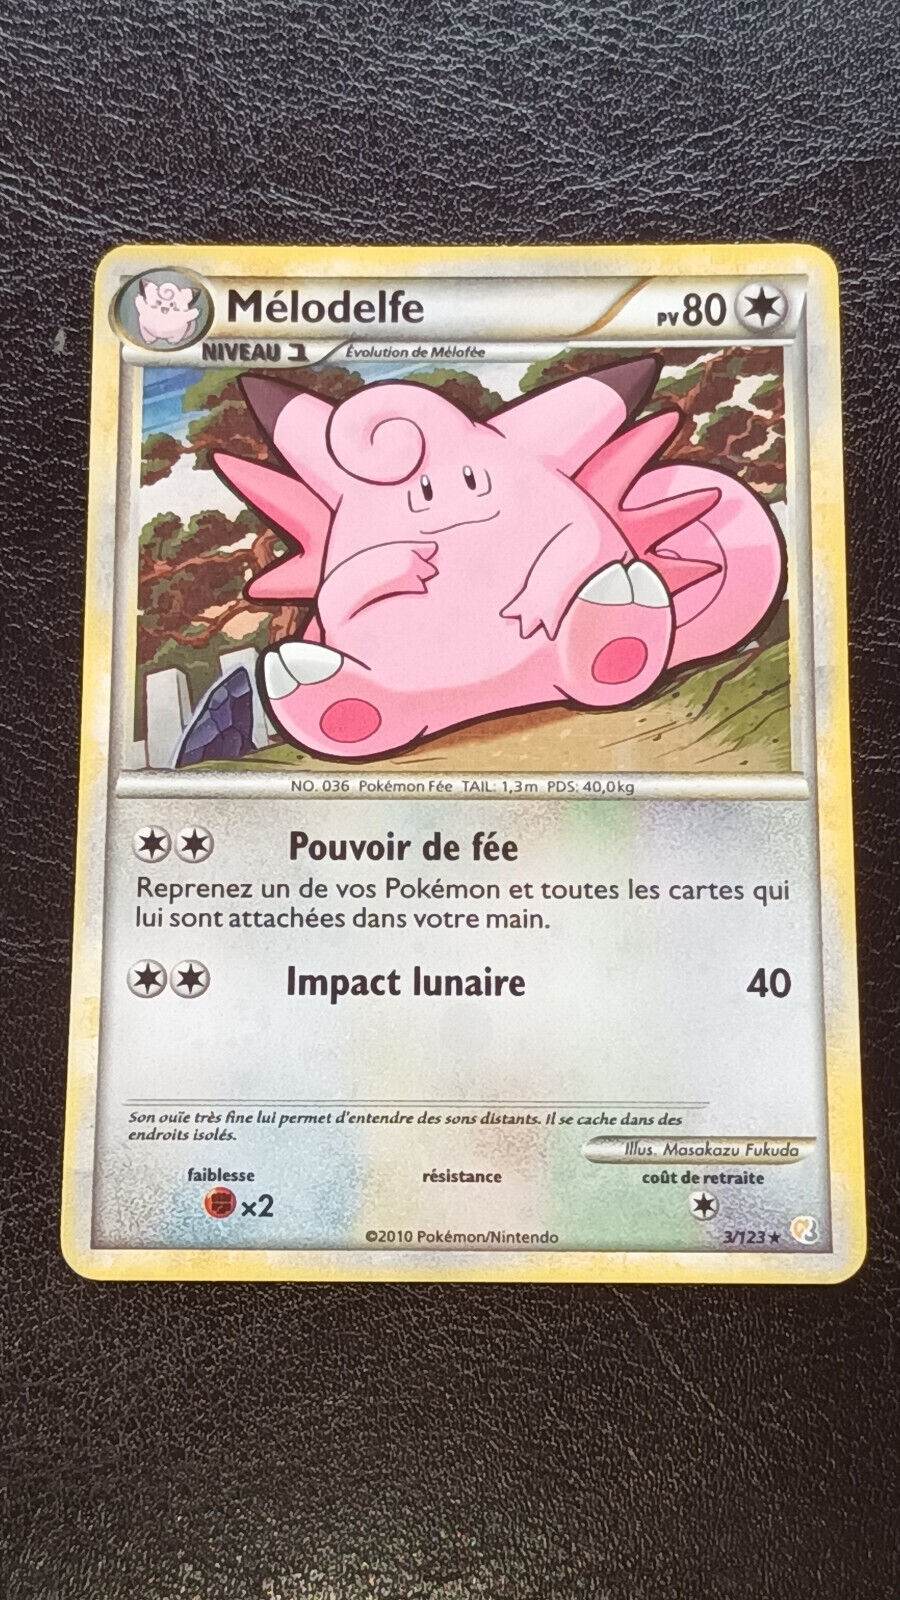 Melodelph 3/123 Holo - Pokemon Card - HGSS - Excellent Condition -